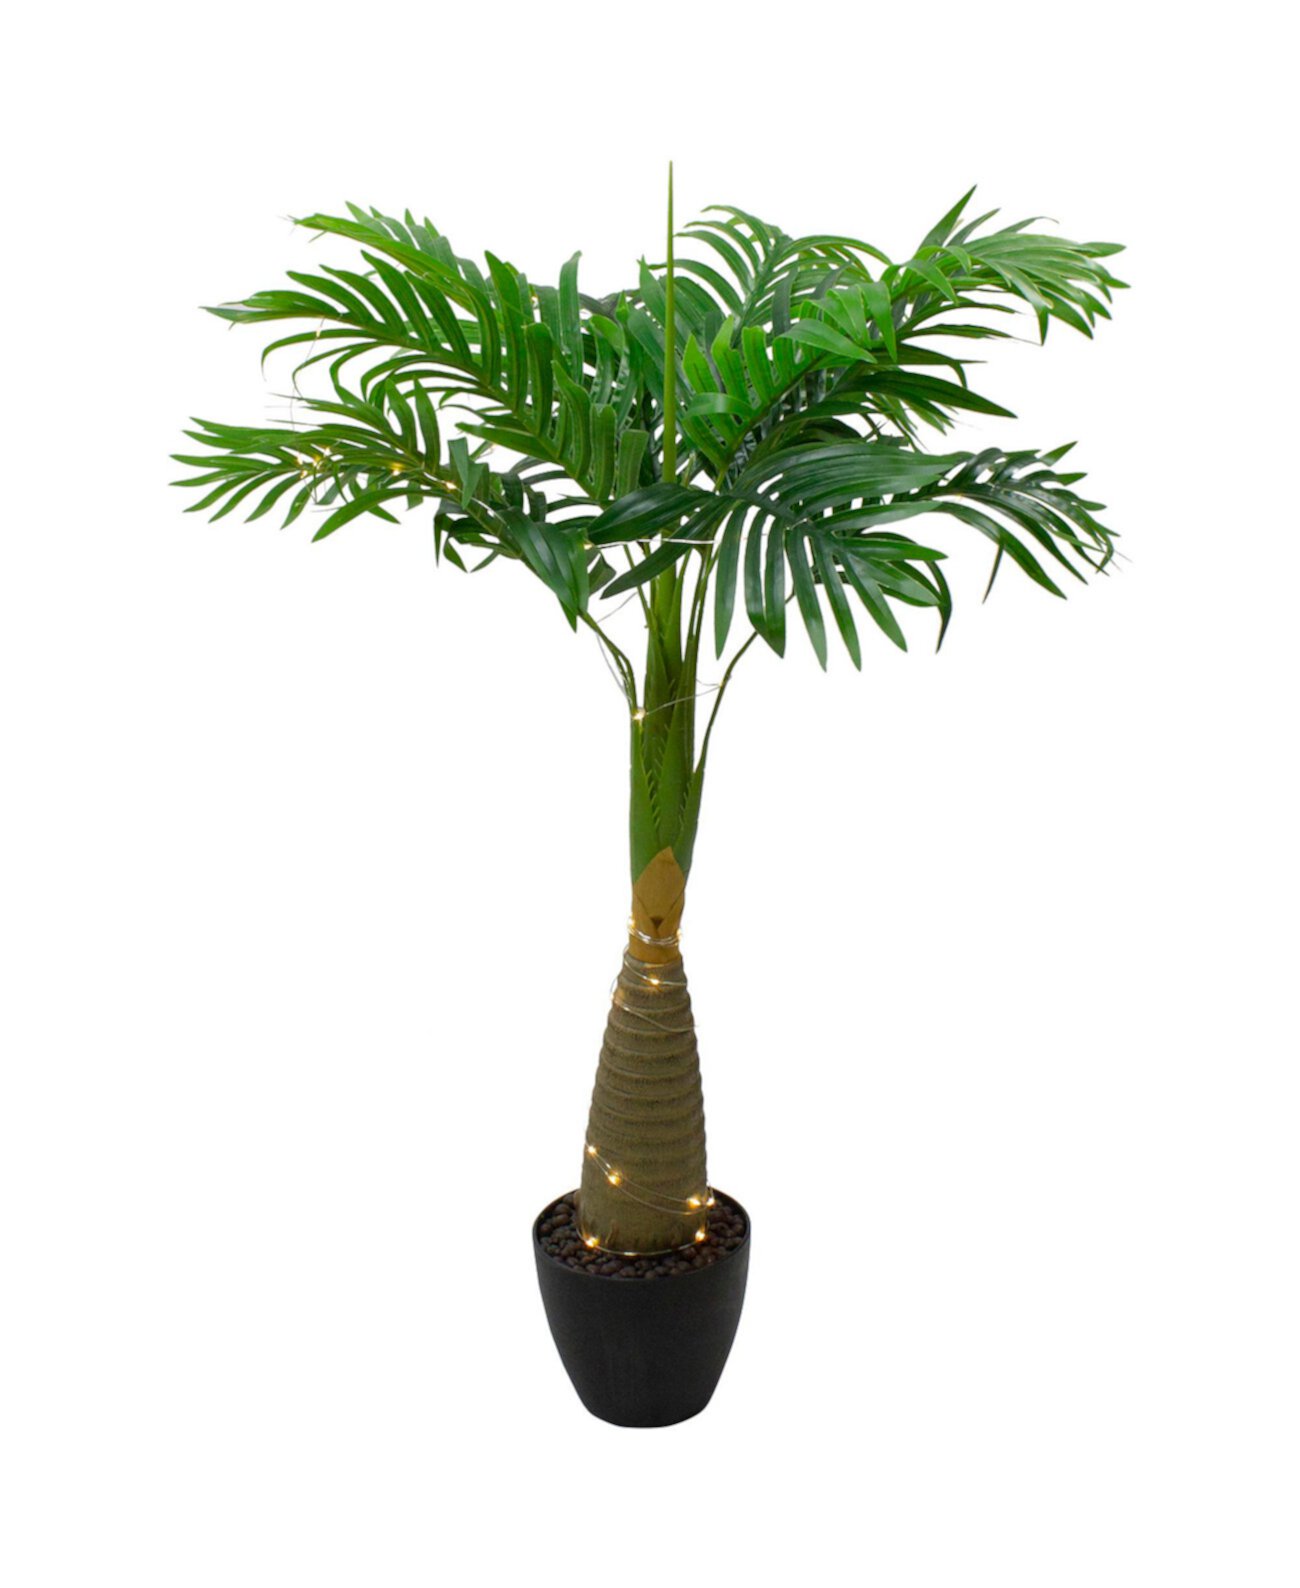 LED Lighted Potted Artificial Palm Plant, 38" Northlight